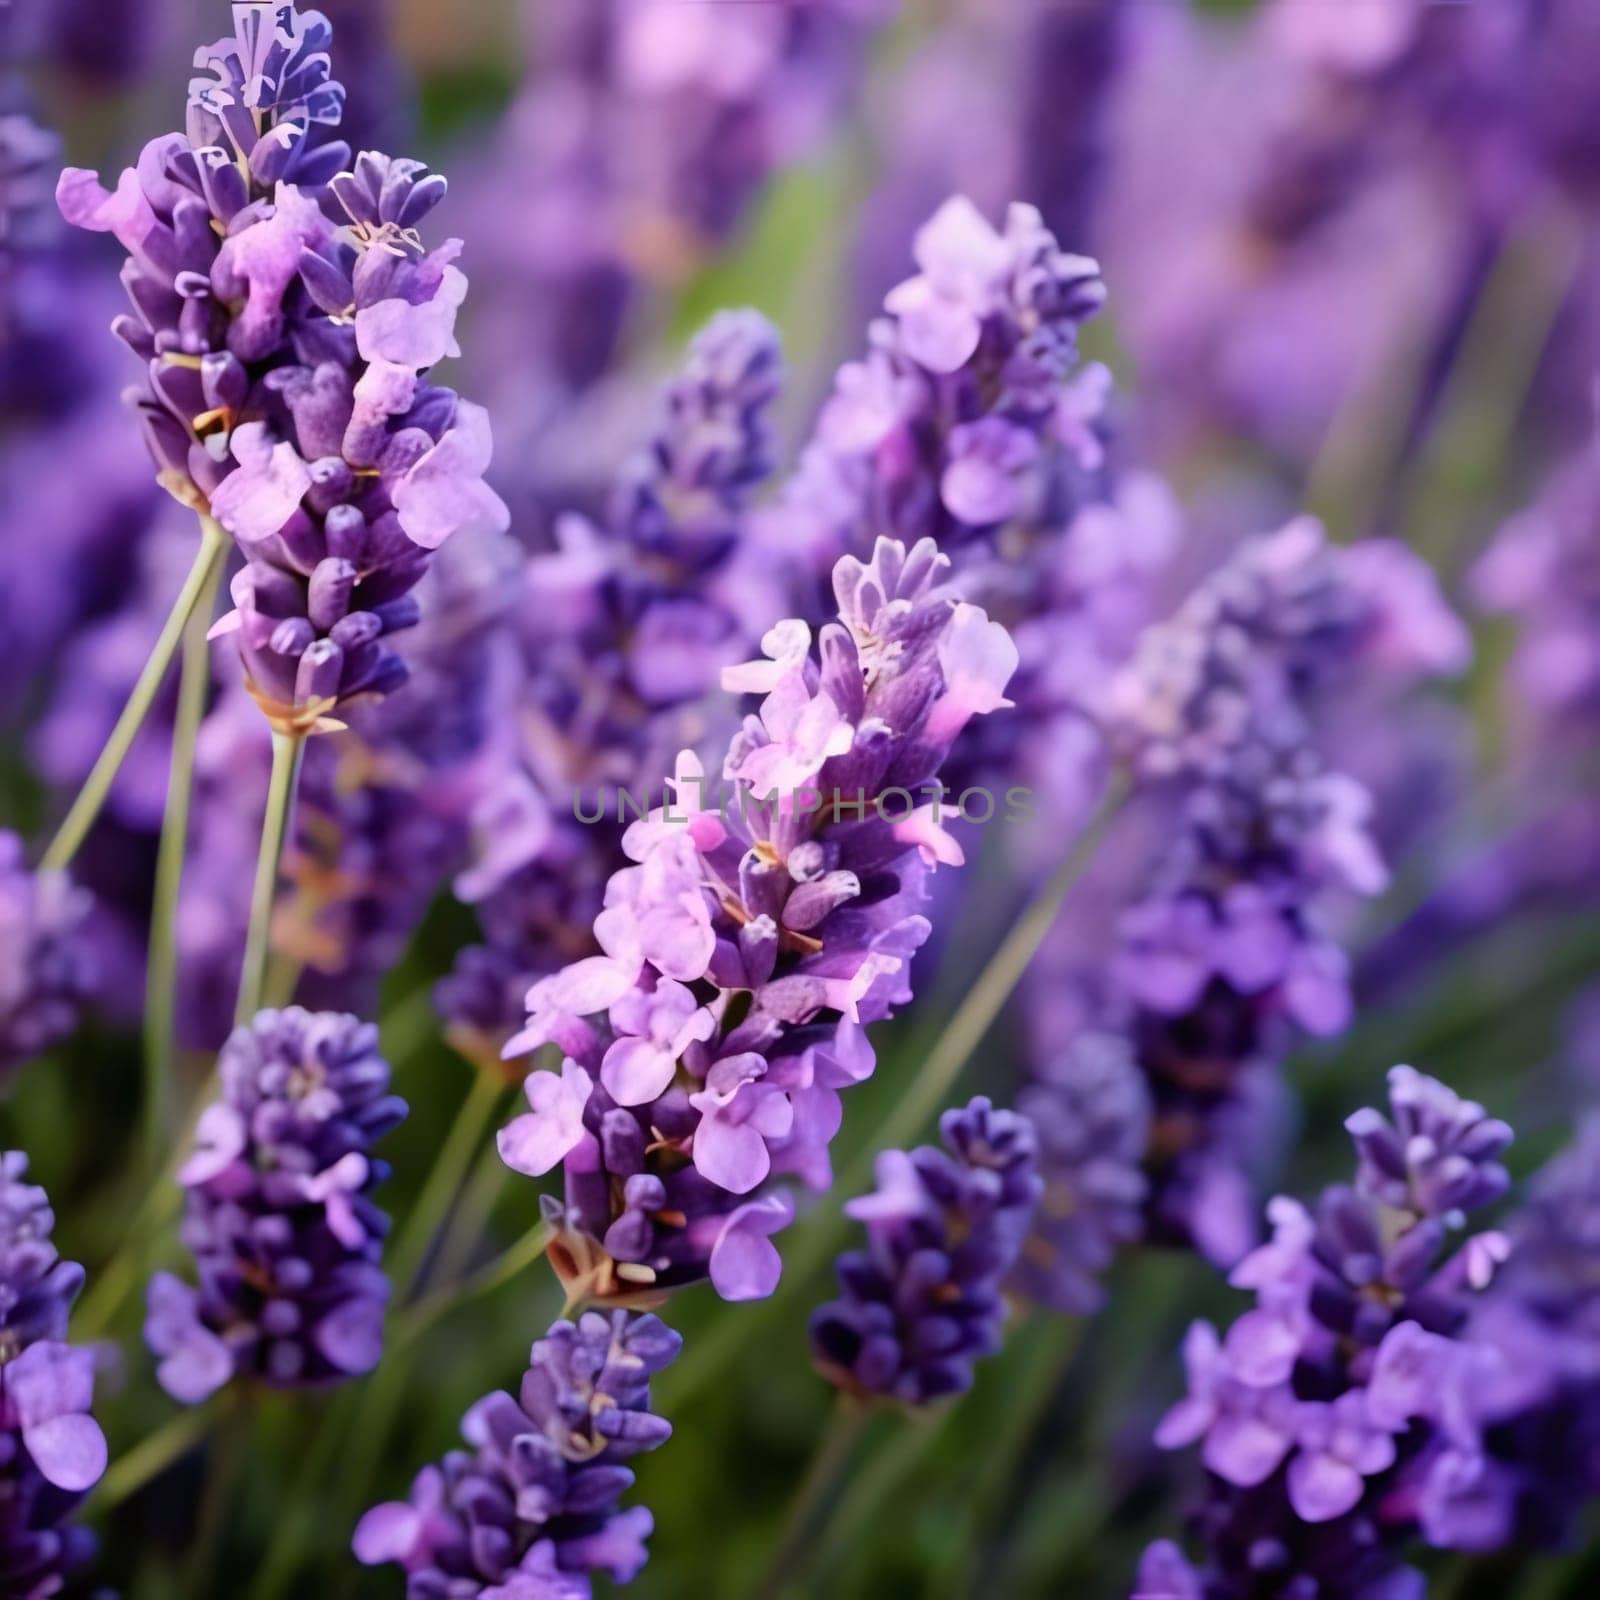 Lavender flowers close up photo.Flowering flowers, a symbol of spring, new life. by ThemesS